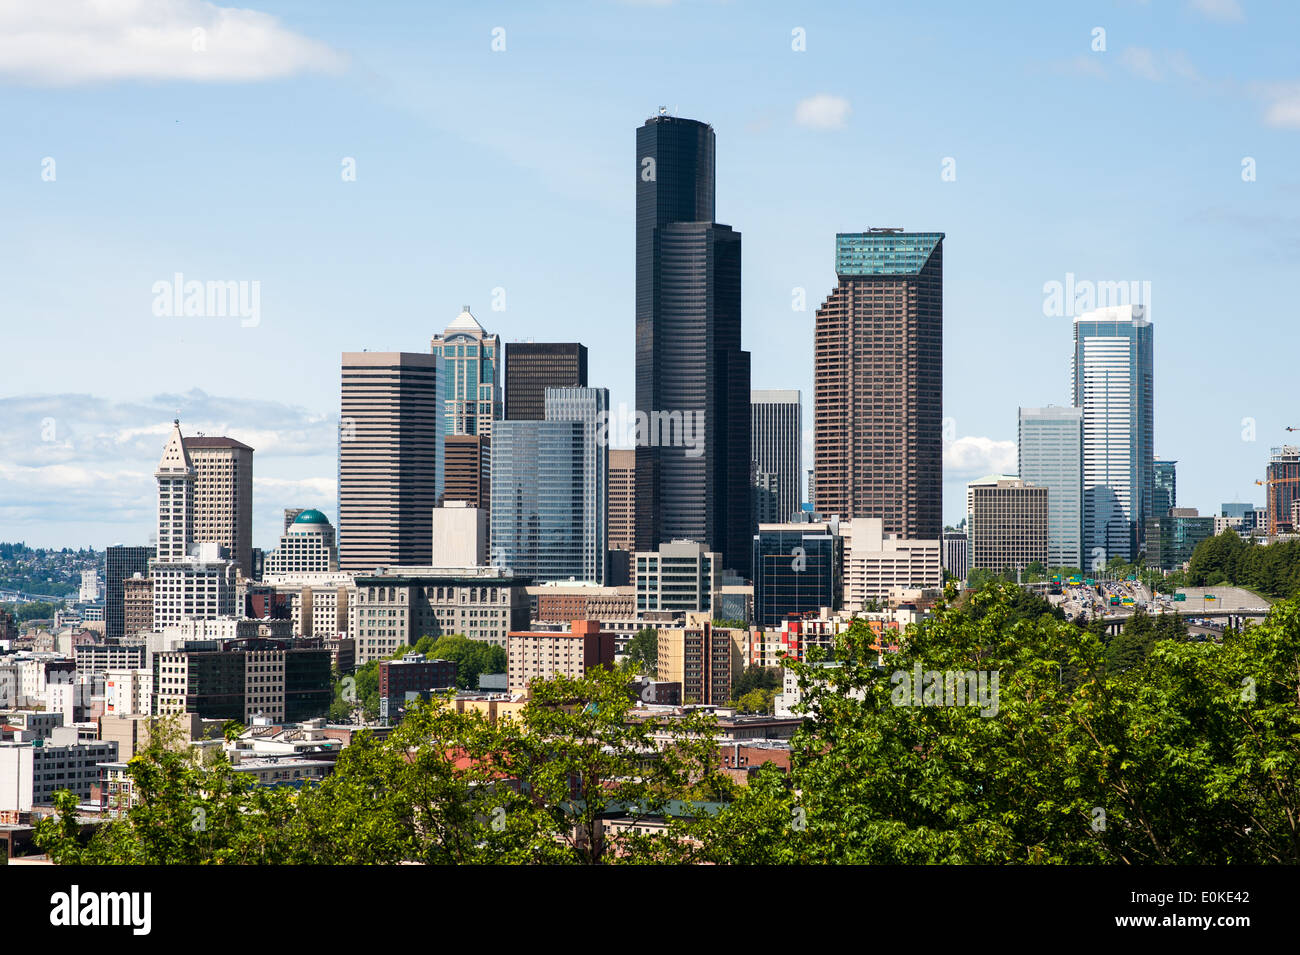 A view of the Seattle skyline from the south. Stock Photo